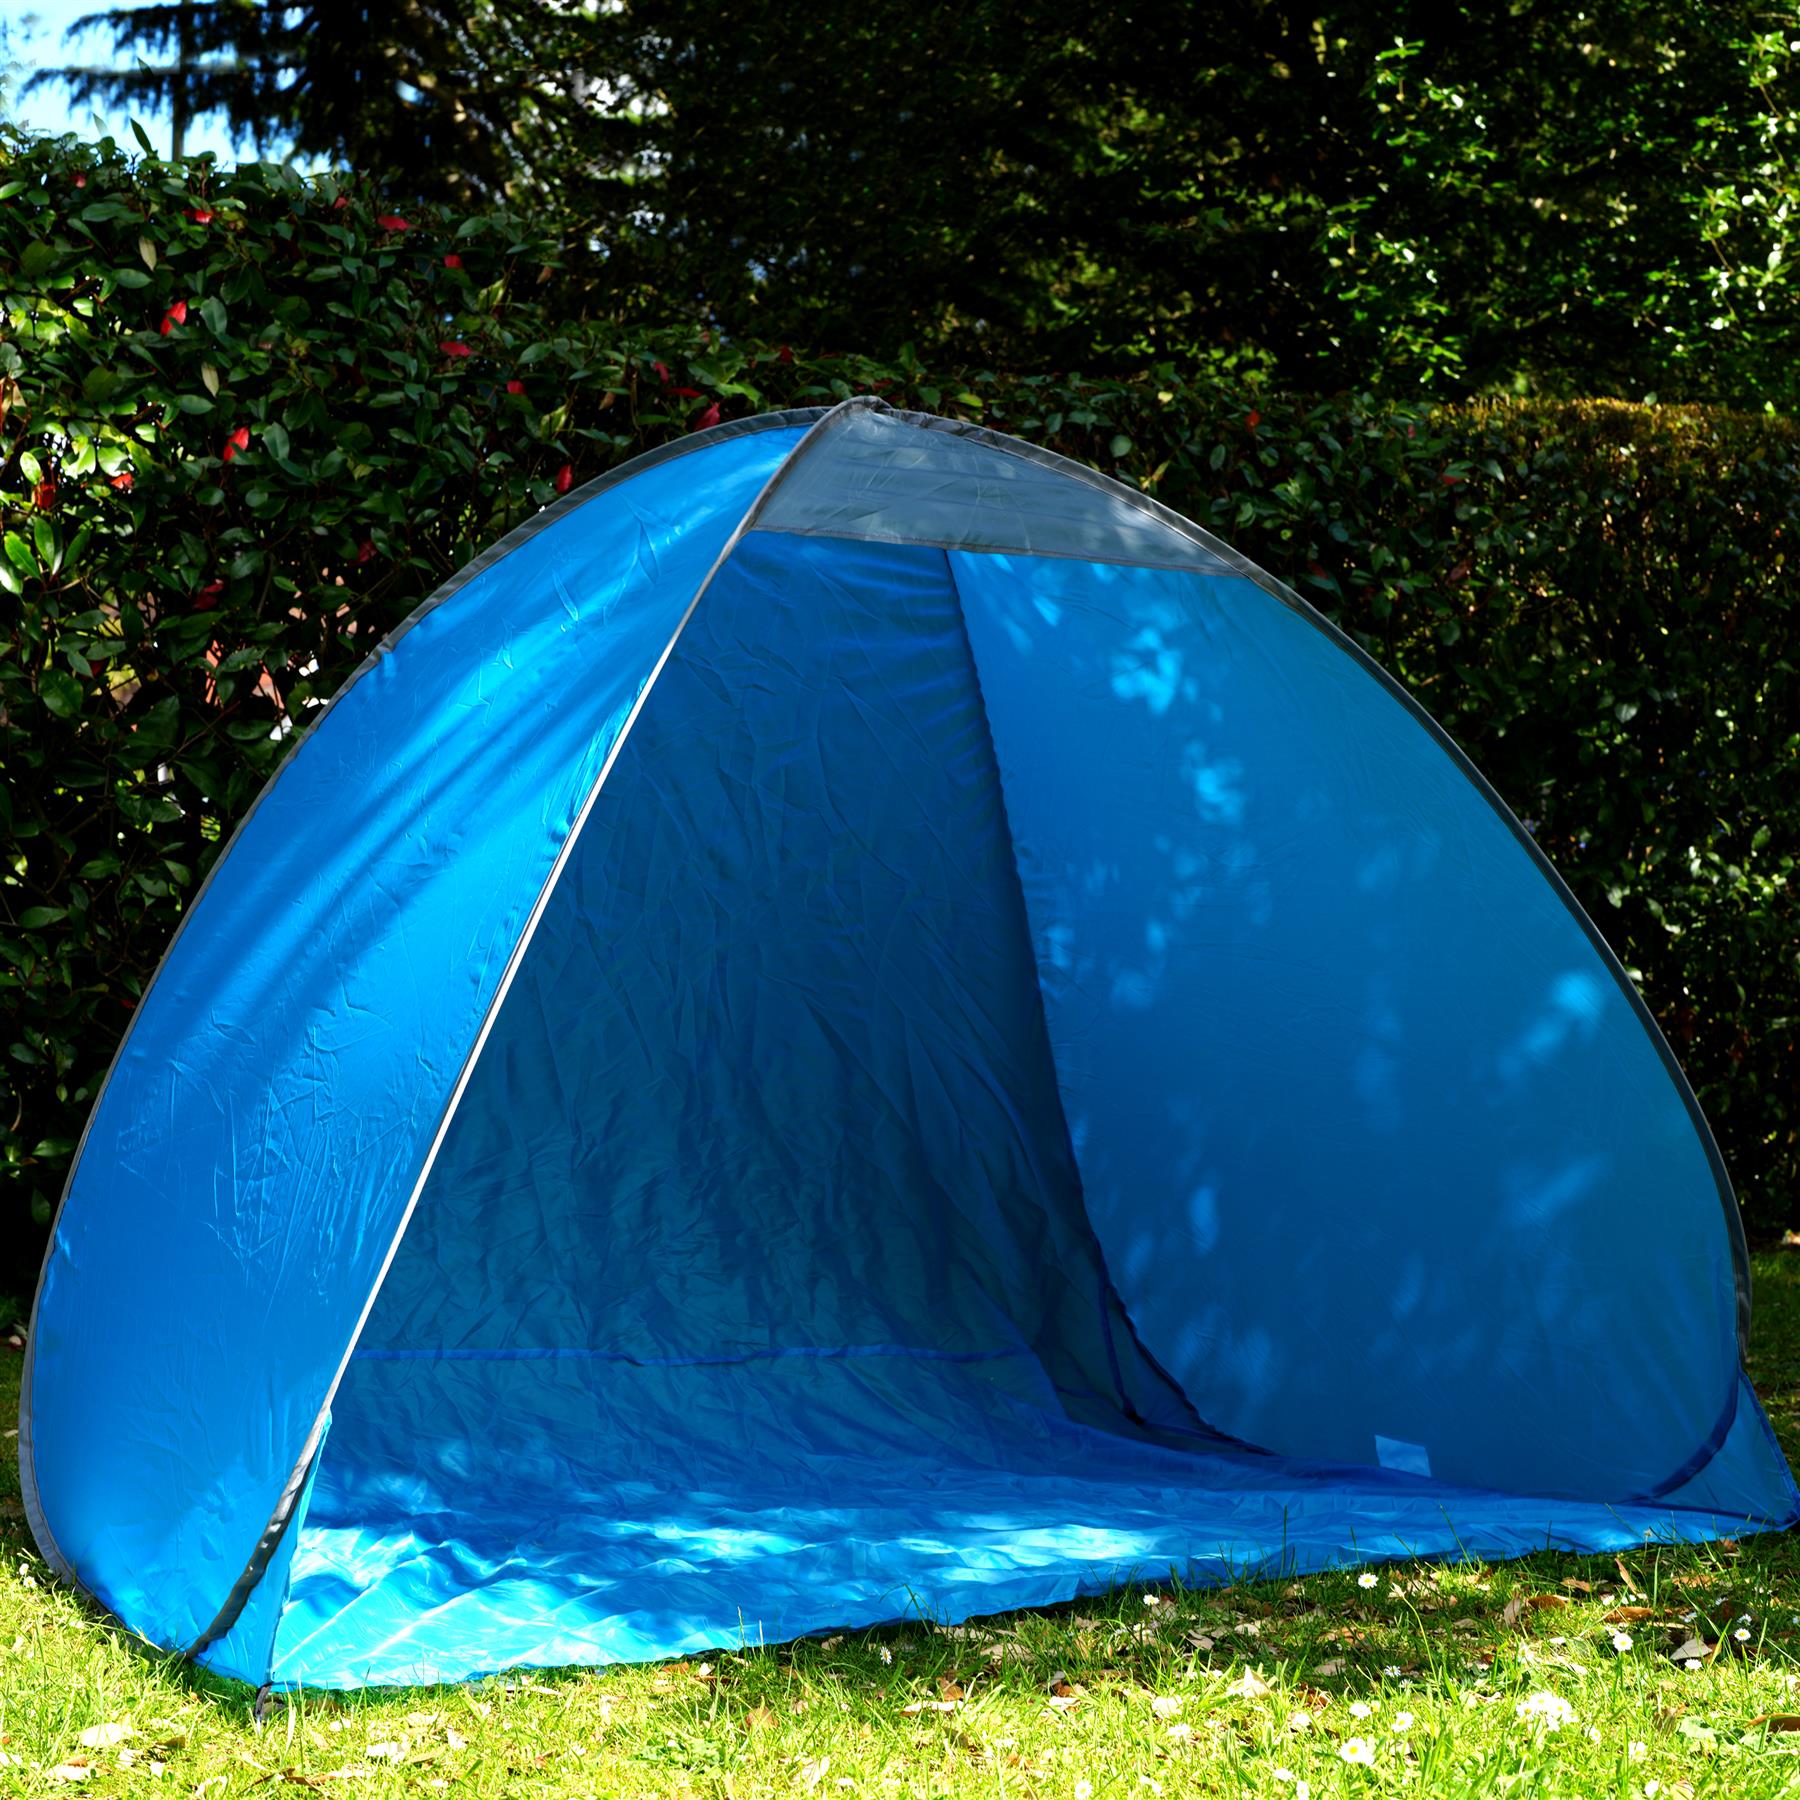 Pop Up 2 Man Camping Shelter by GEEZY - The Magic Toy Shop